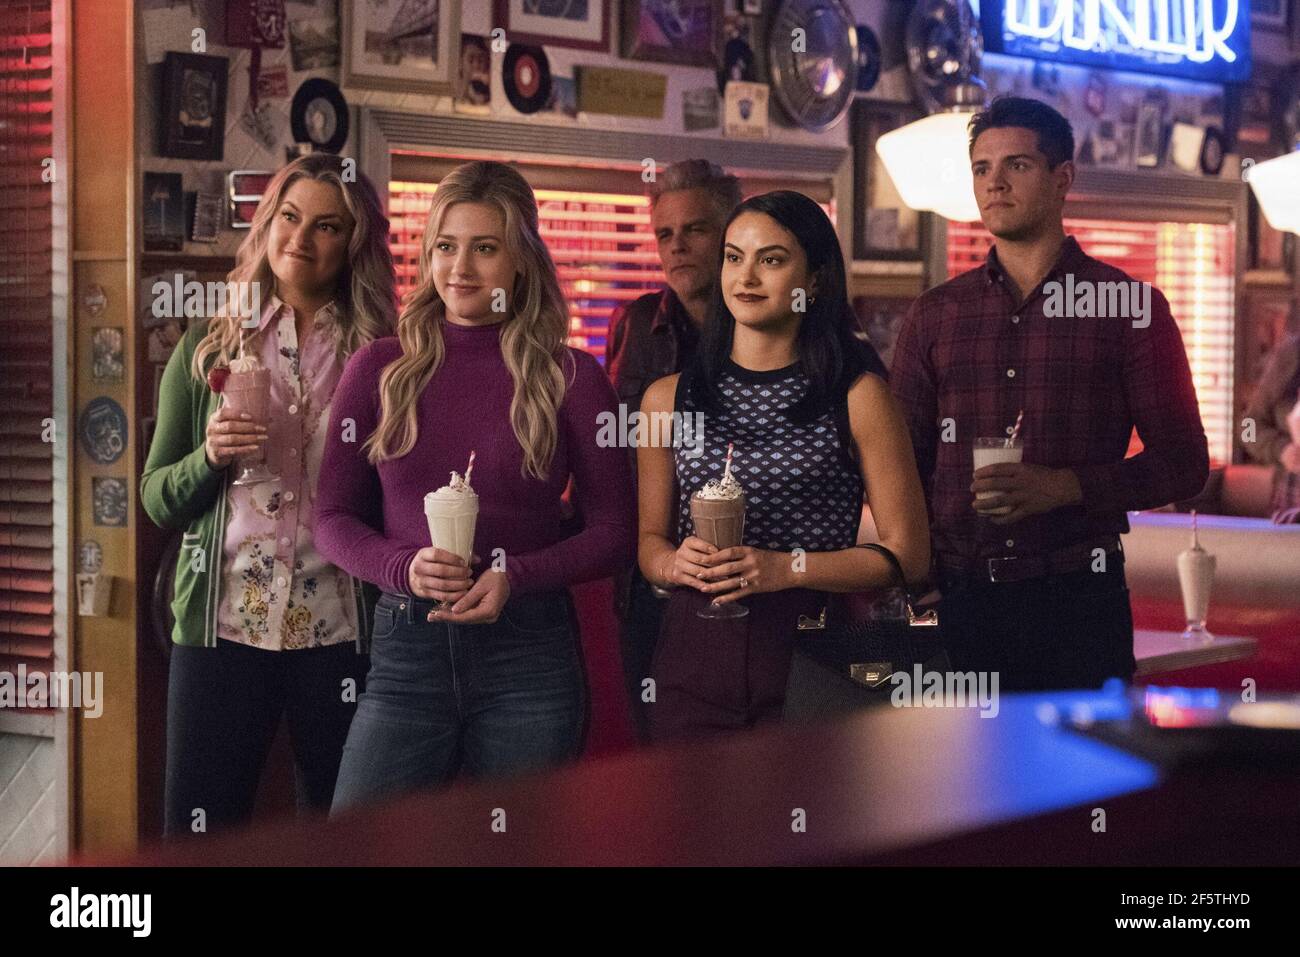 MADCHEN AMICK, LILI REINHART, CAMILA MENDES, CASEY COTT and MARTIN CUMMINS in RIVERDALE (2017), directed by ROBERTO AGUIRRE-SACASA. Season 5. Credit: CBS TELEVISION / Album Stock Photo